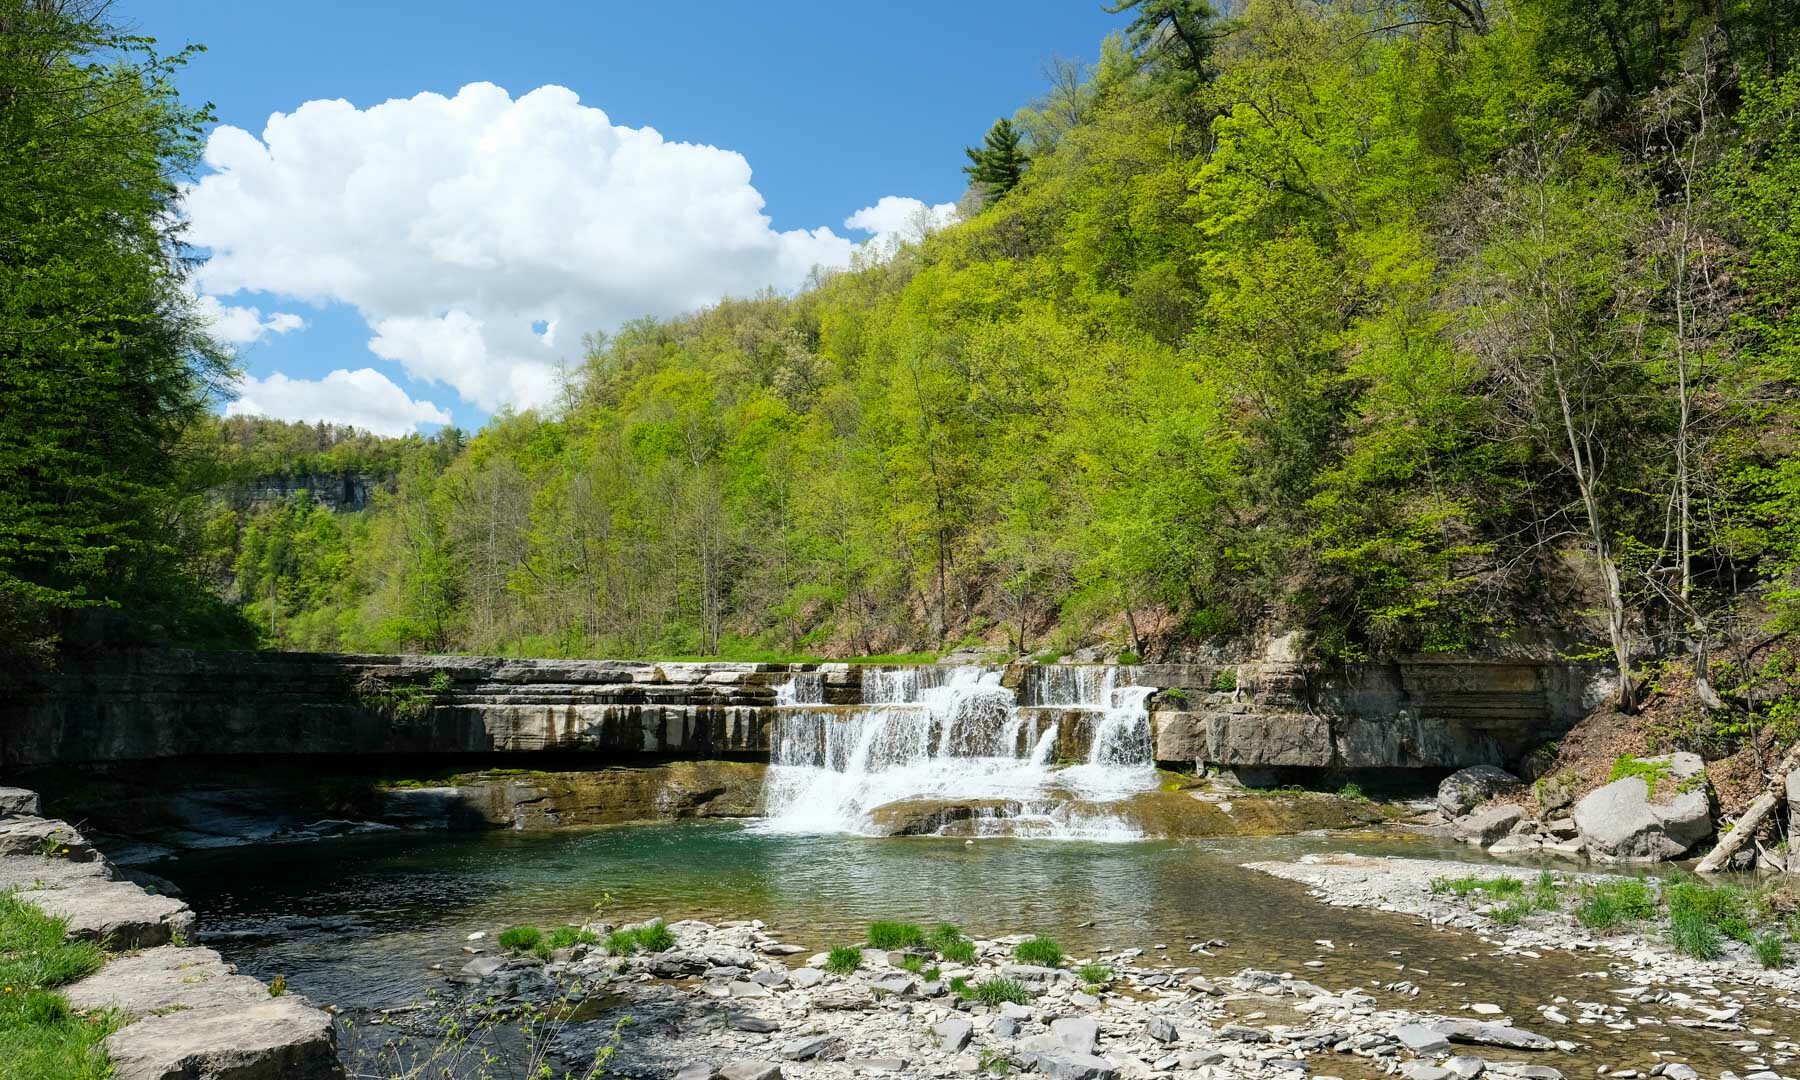 The Best Things to do in Ithaca, NY